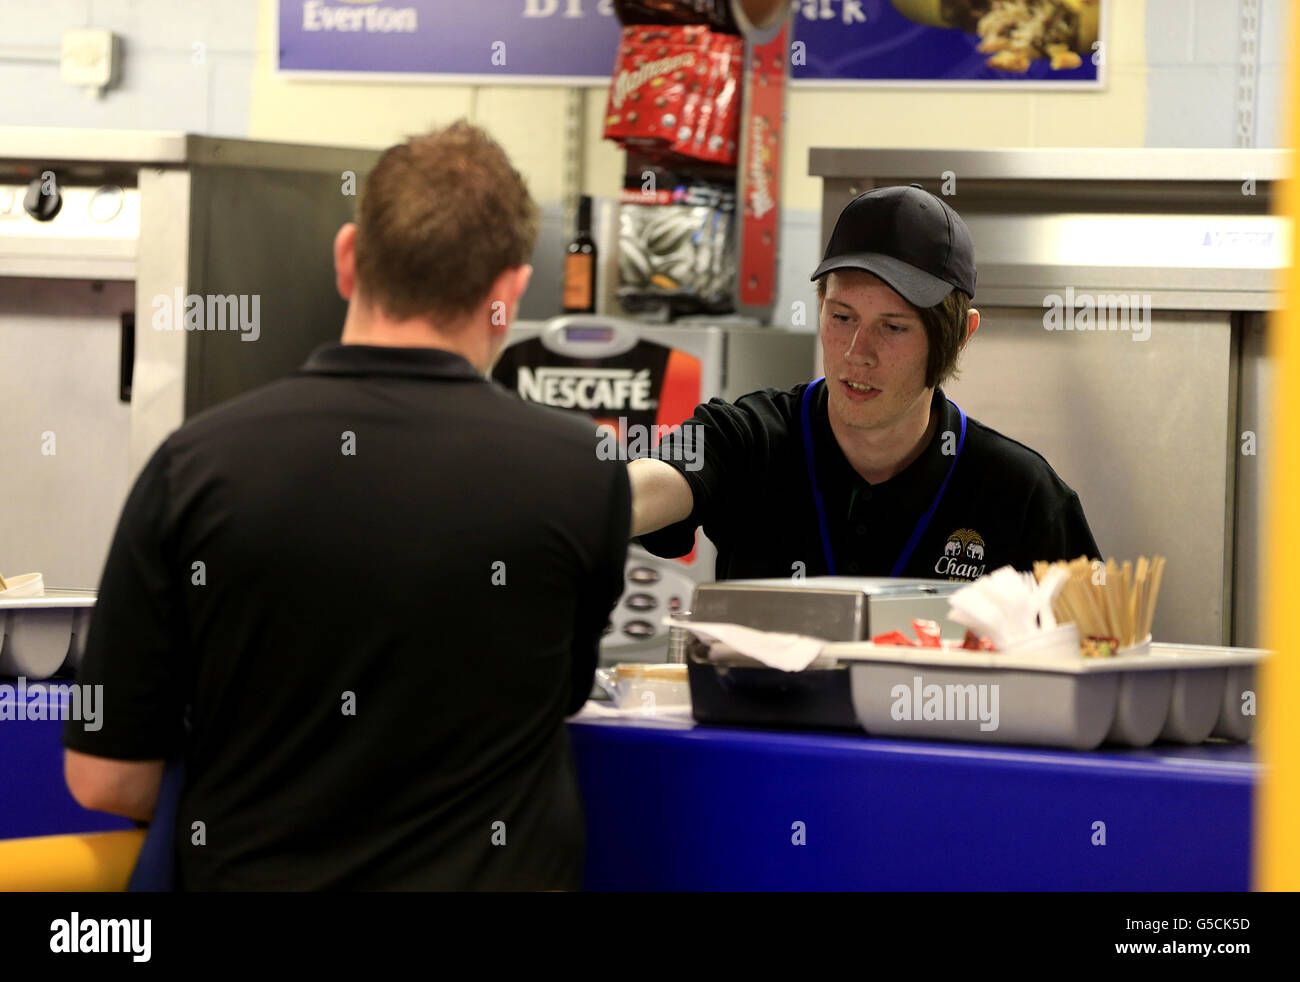 an-everton-fan-buys-food-and-drink-at-goodison-park-before-the-game-G5CK5D.jpg